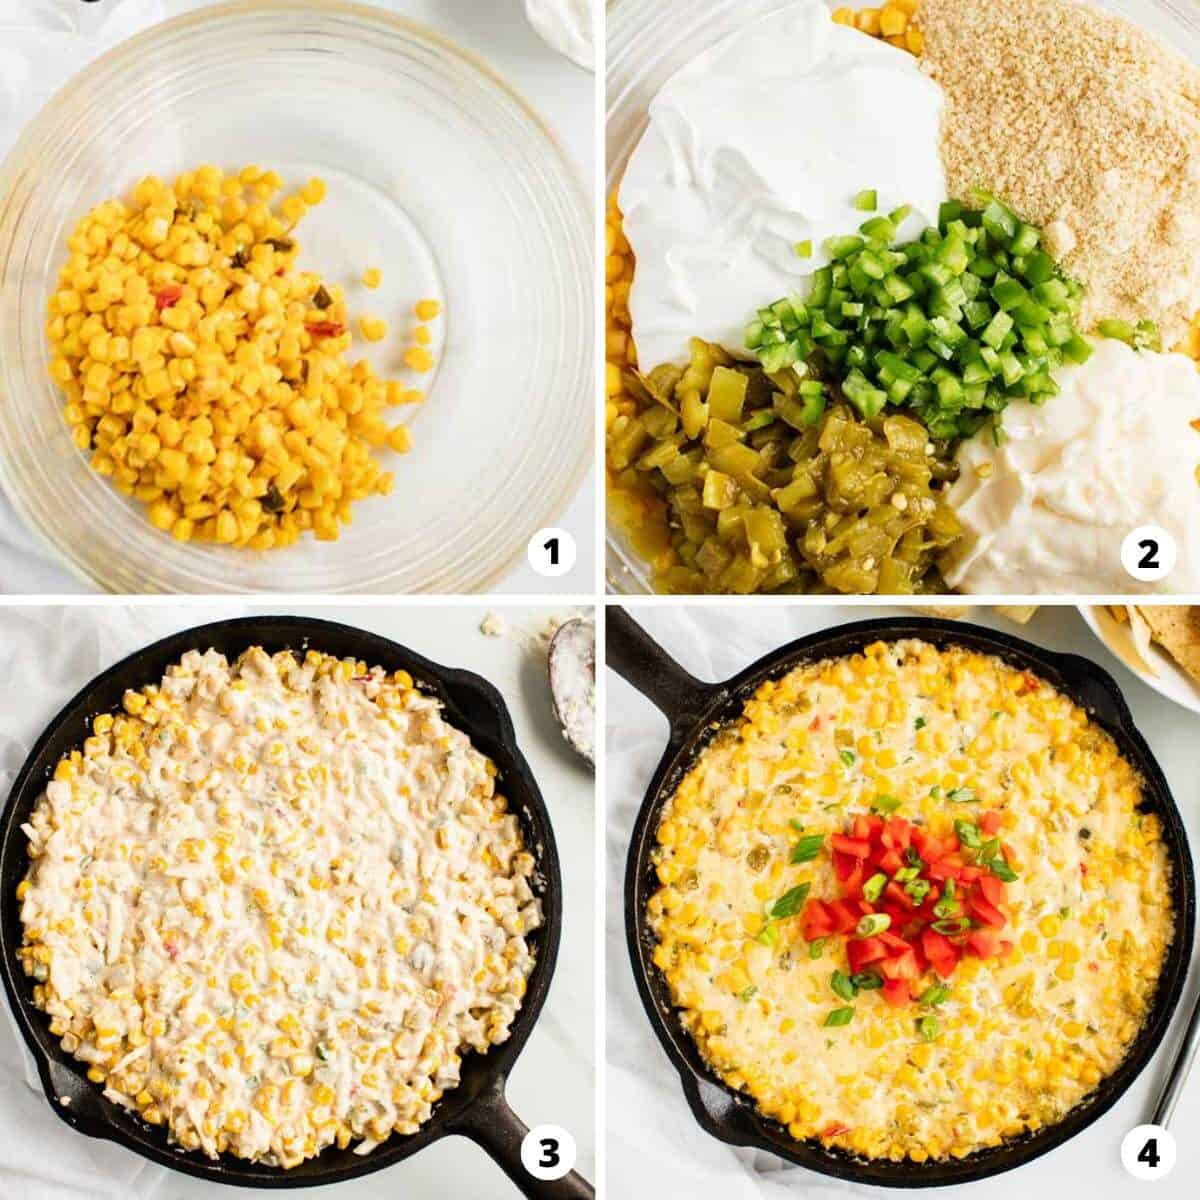 Showing how to make corn dip in a 4 step collage.